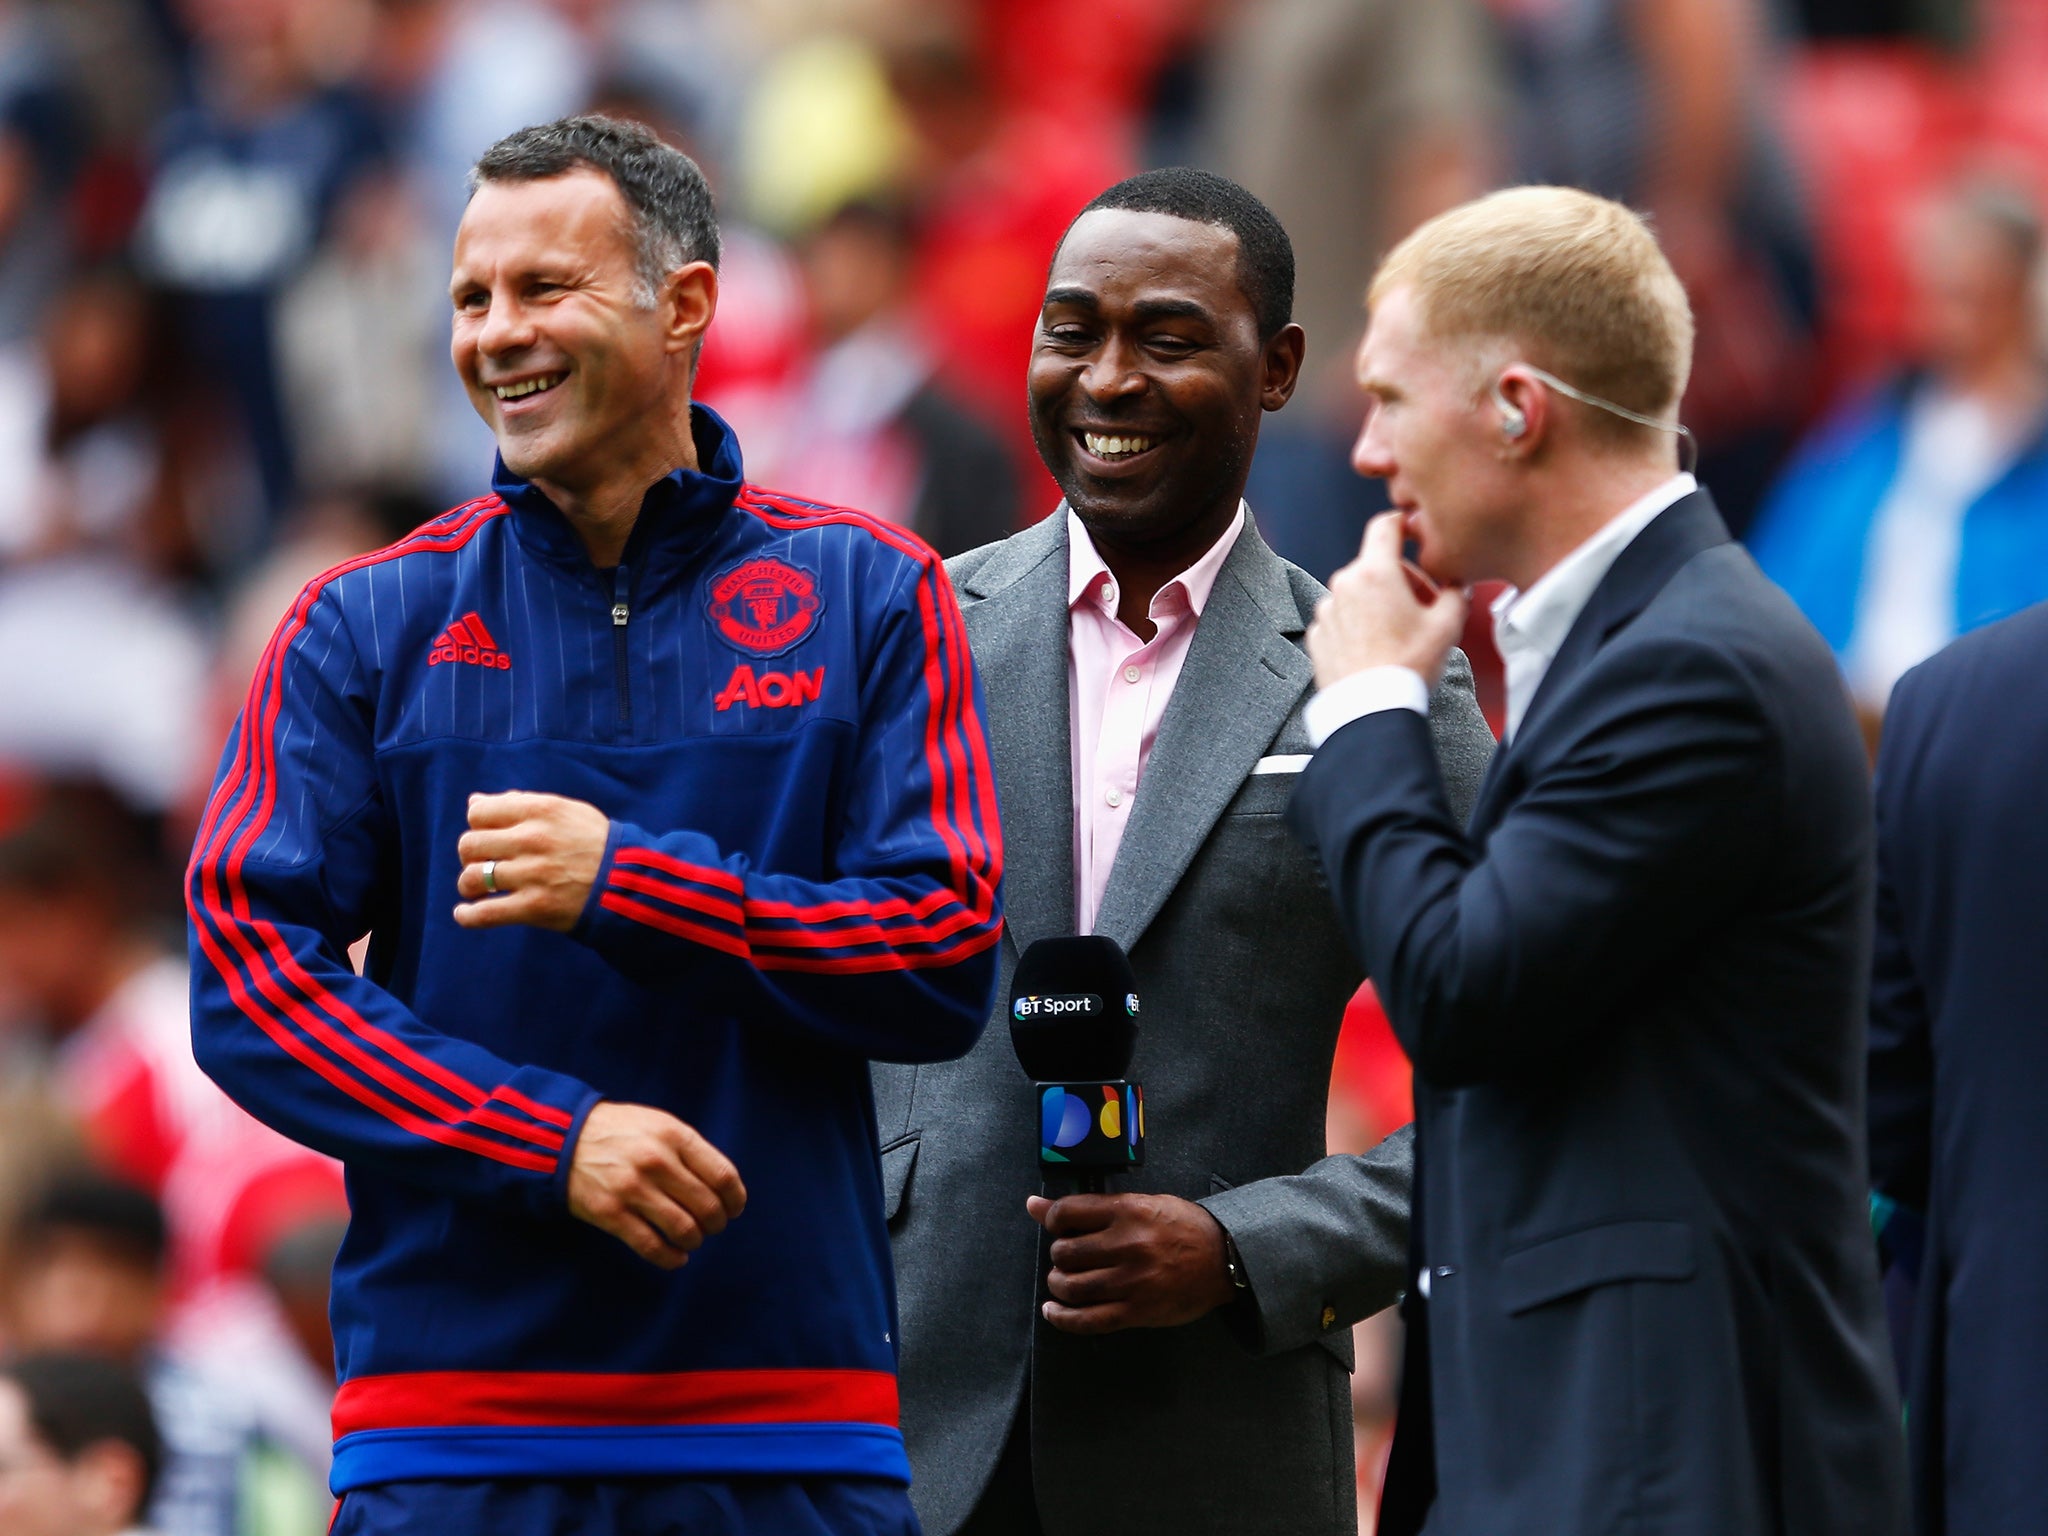 Giggs shares a joke with former team-mates Scholes and Andy Cole